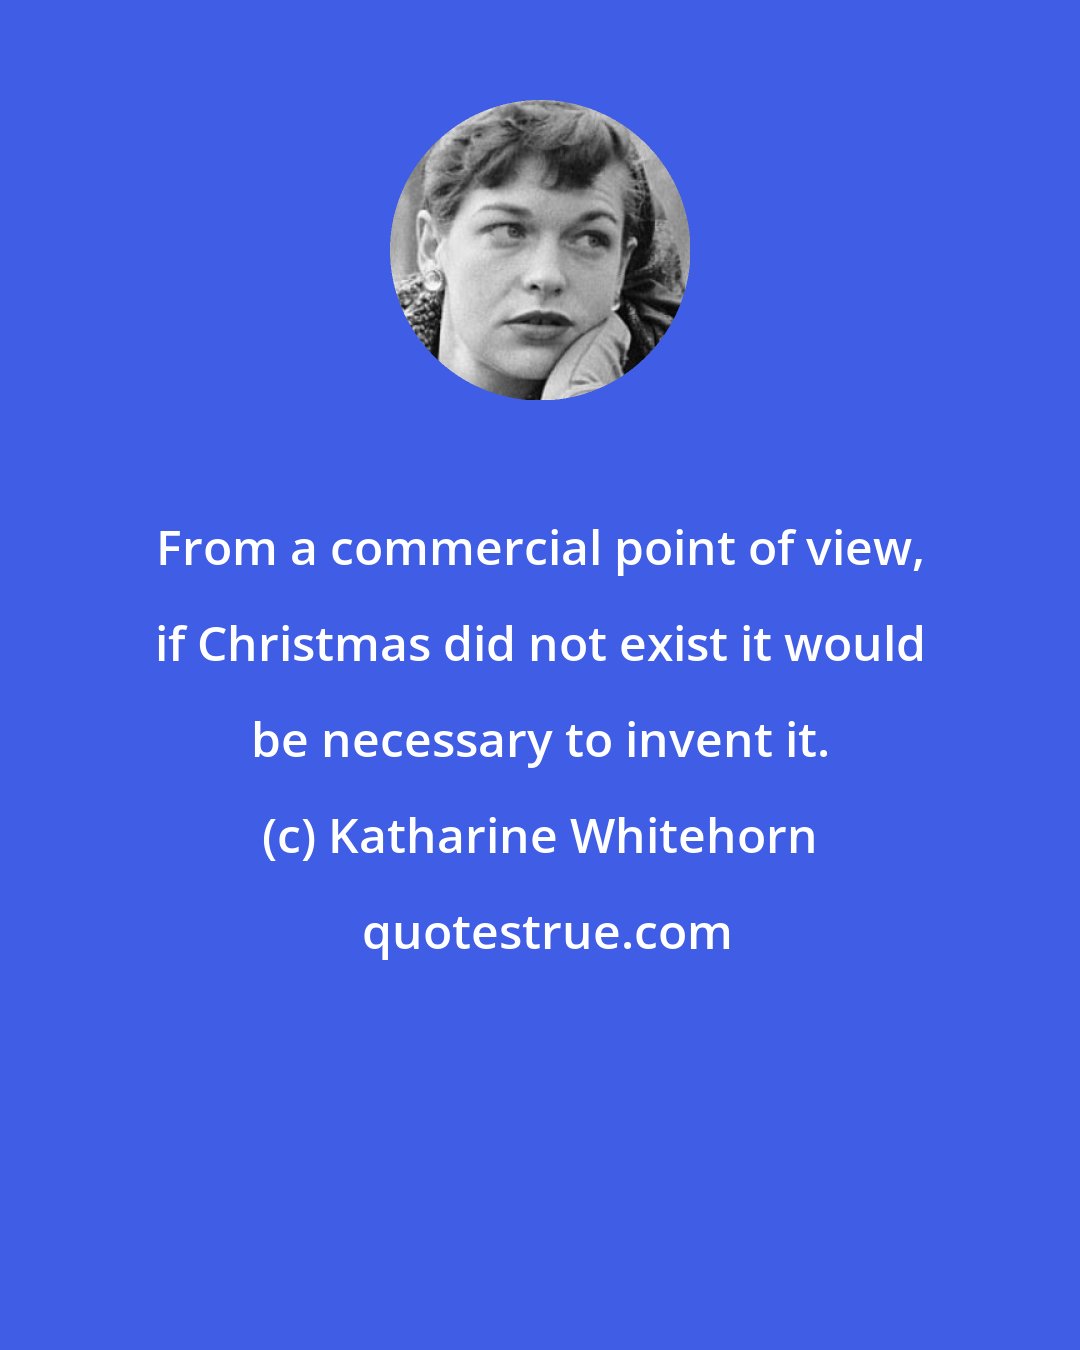 Katharine Whitehorn: From a commercial point of view, if Christmas did not exist it would be necessary to invent it.